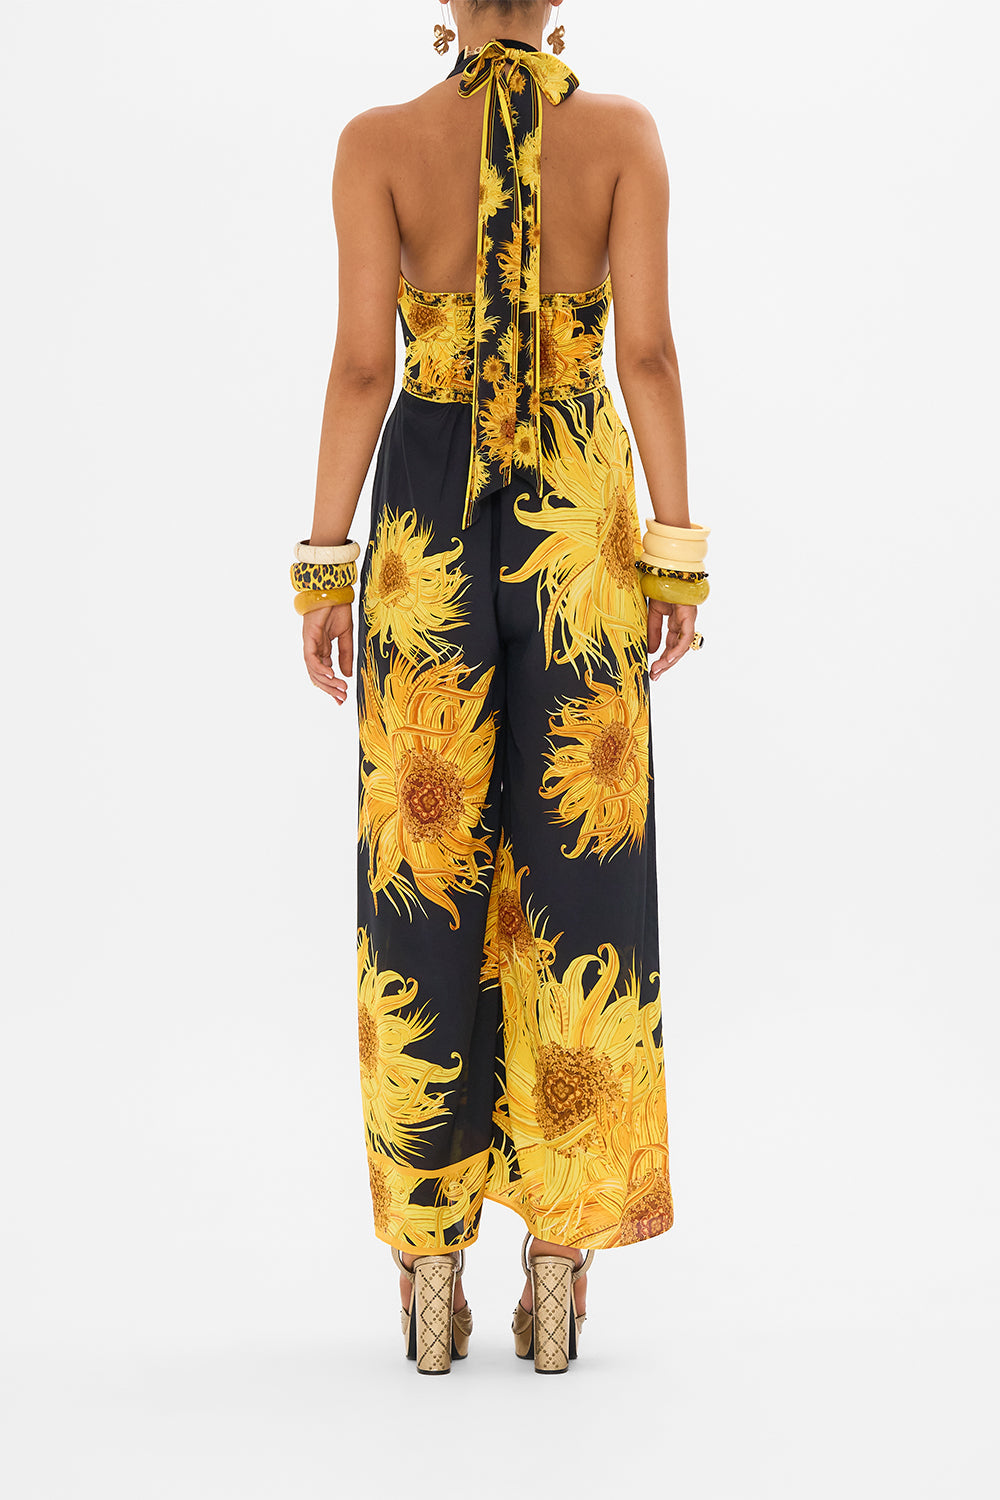 CAMILLA halter jumpsuit in Make Me Your Masterpiece print